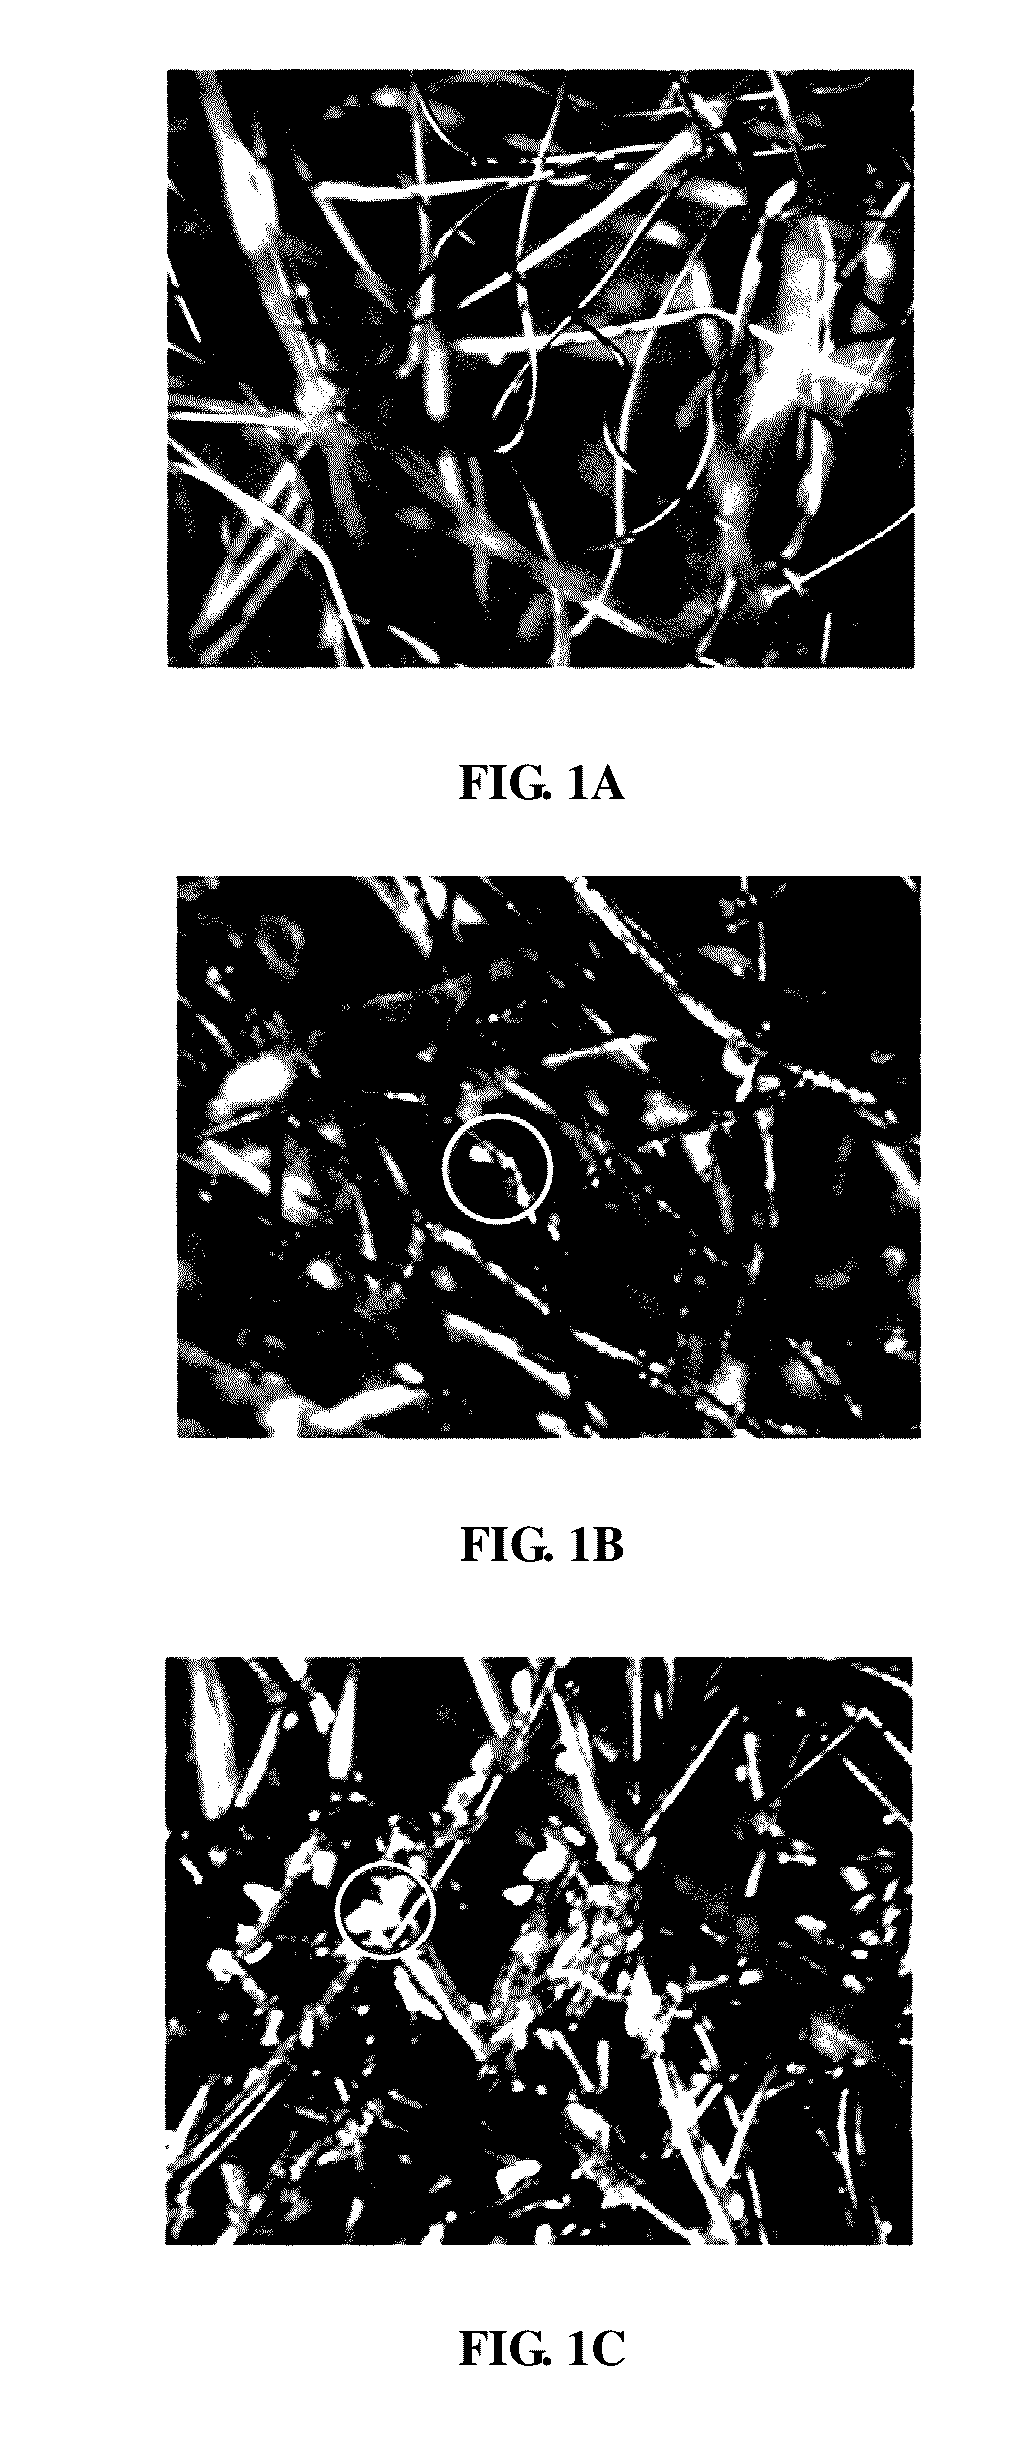 Sound absorbing and insulating material and method for manufacturing the same